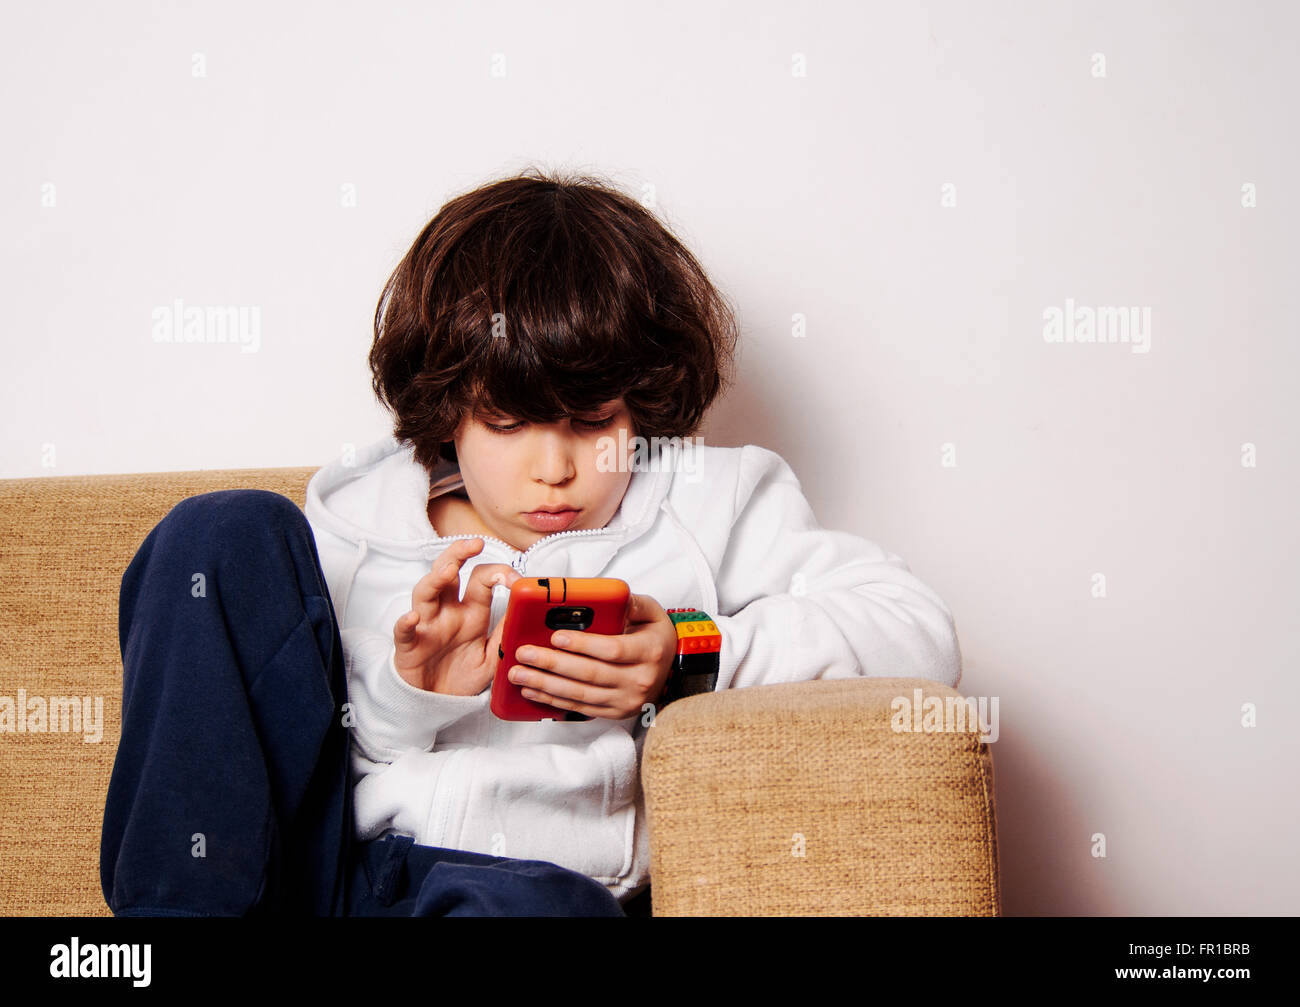 elementary school boy engrossed in a game on a mobile phone on the sofa Stock Photo